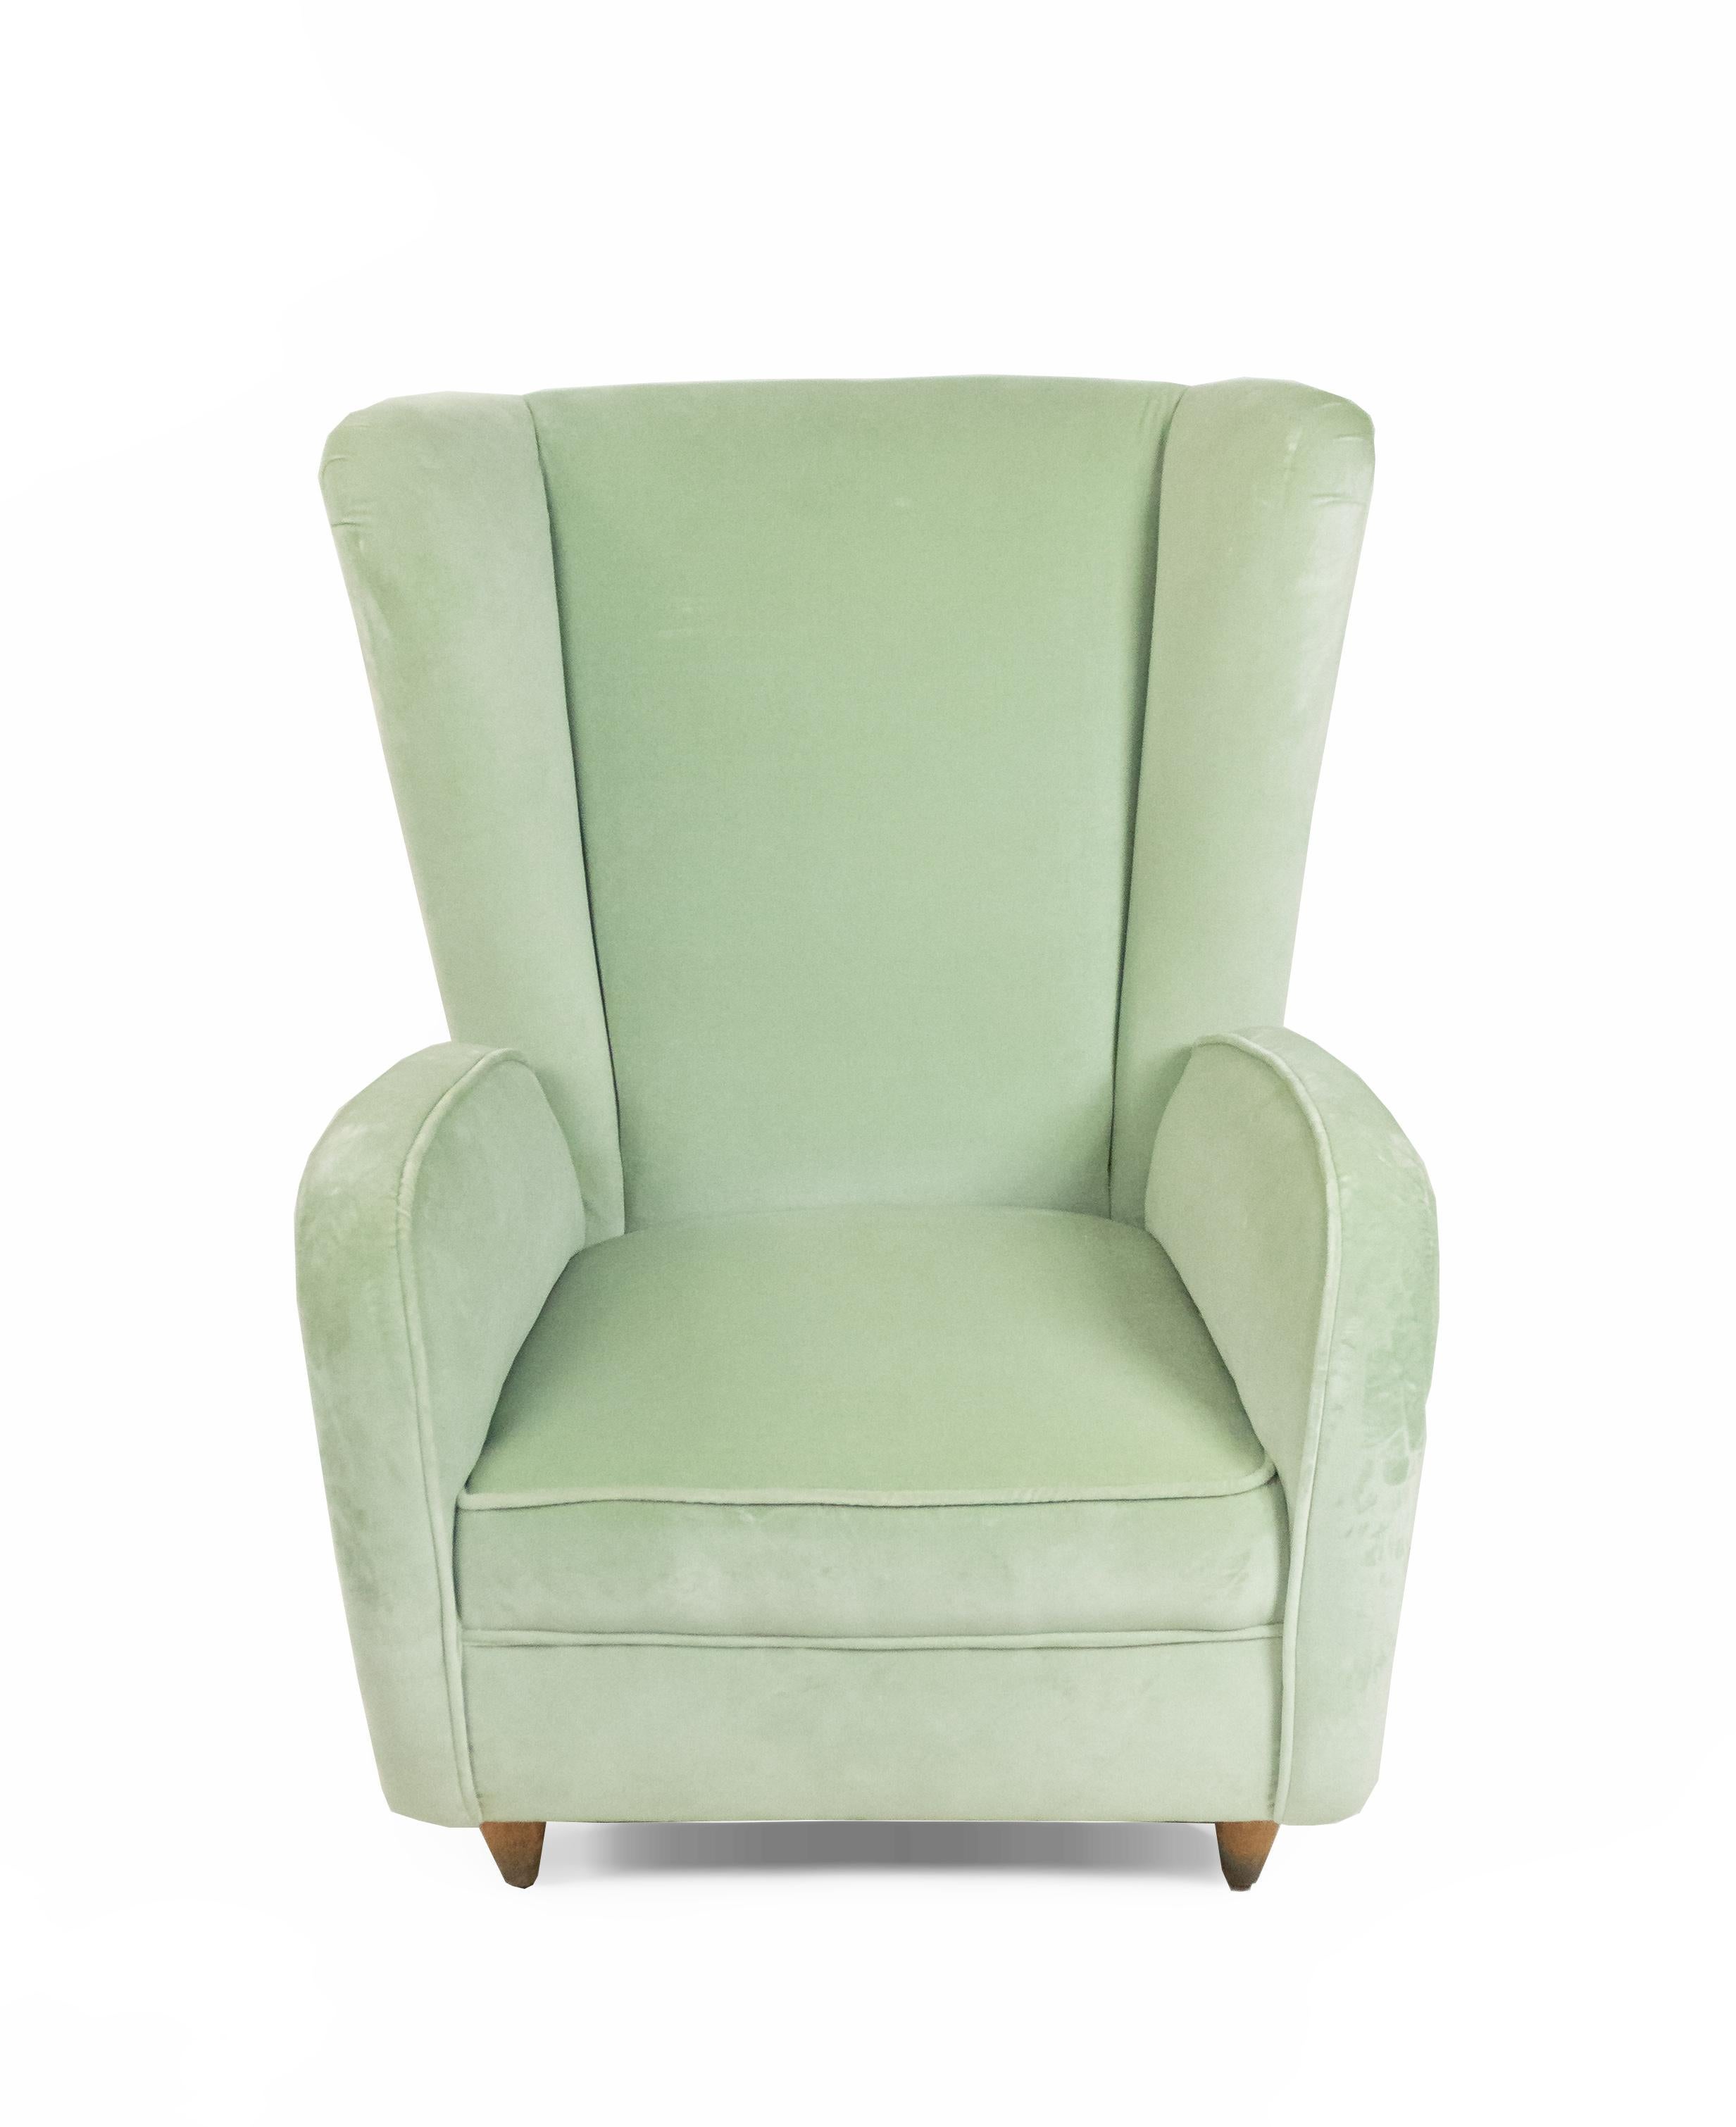 Pair of Italian Modernist (1960s) Paolo Buffa style wing back mint green velvet diminutive (small scale) armchairs with piping and wooden peg legs on round brass feet.